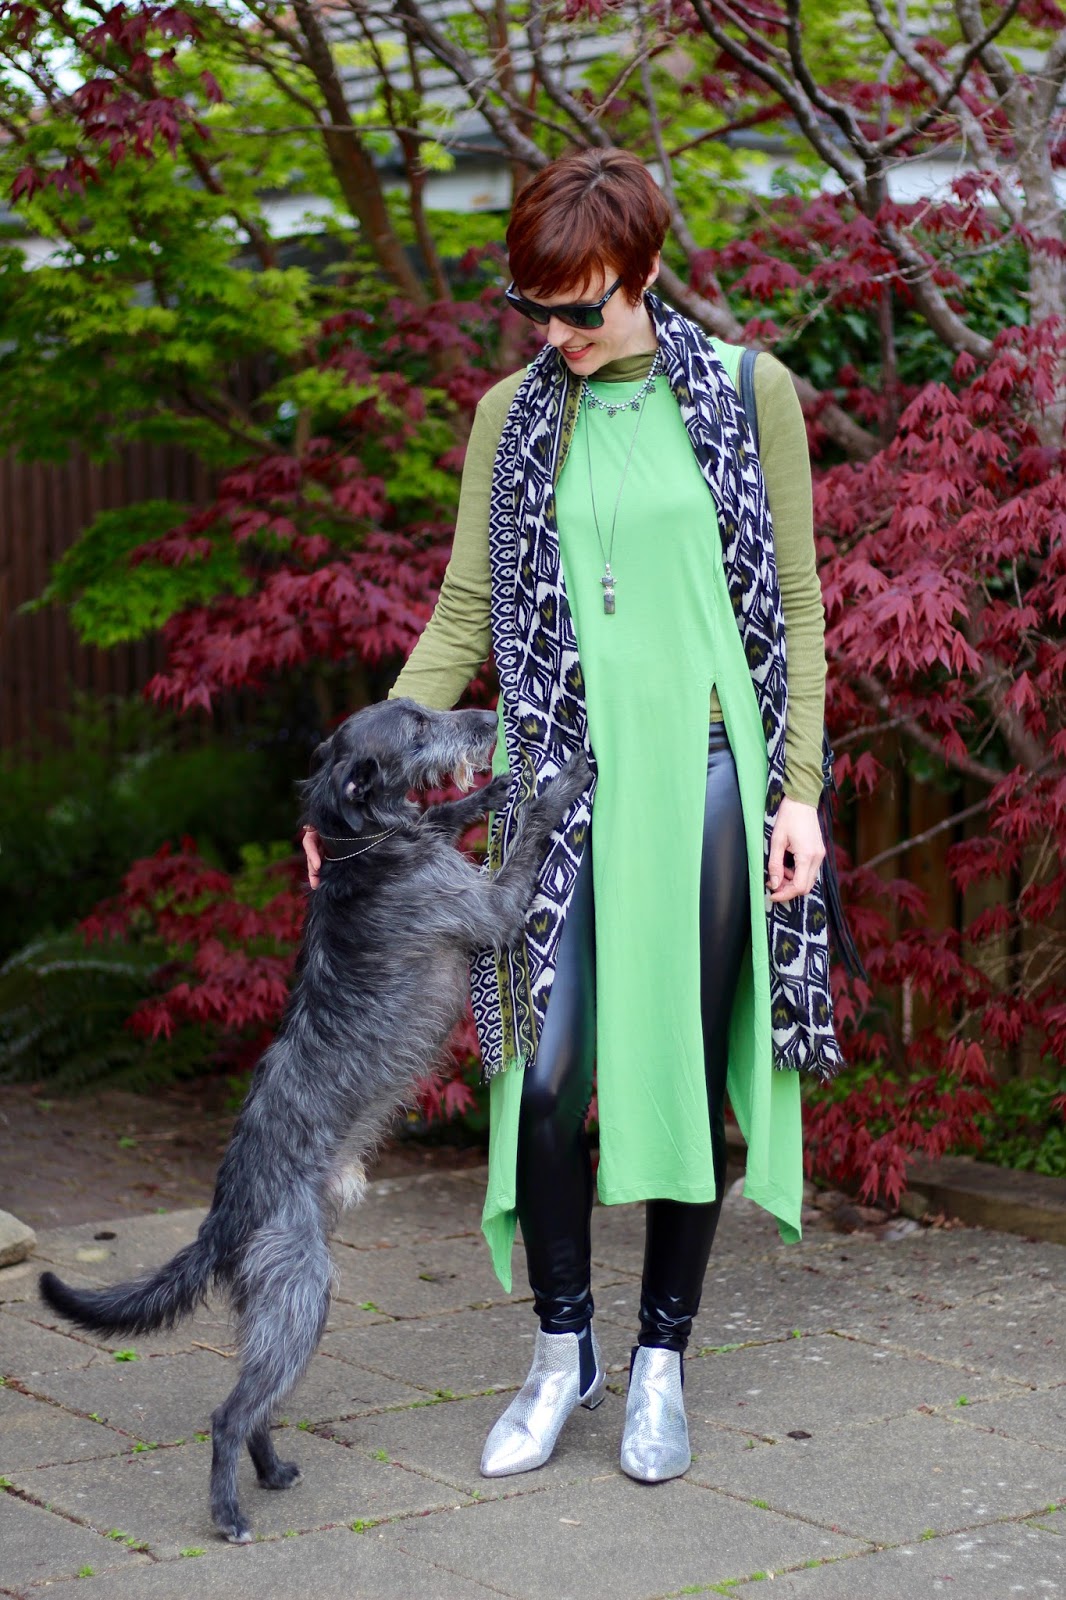 7 ways to be a Villain! | Green Tunic, Vinyl leggings, Silver Boots | Black and Green, over 40.